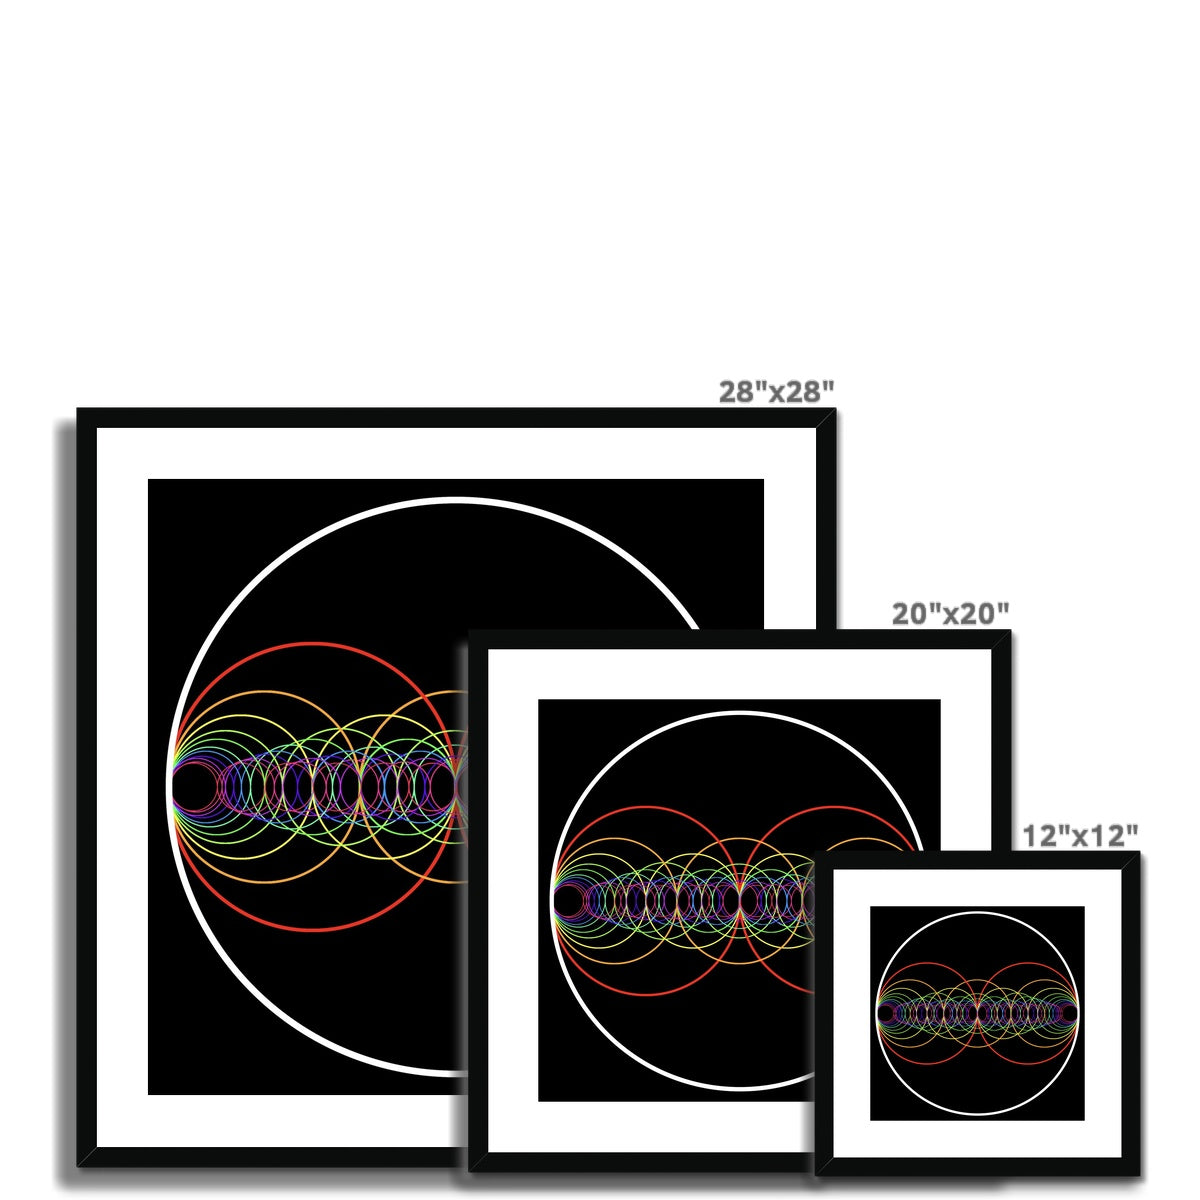 Complete Sound Waves in a Circle Framed & Mounted Print